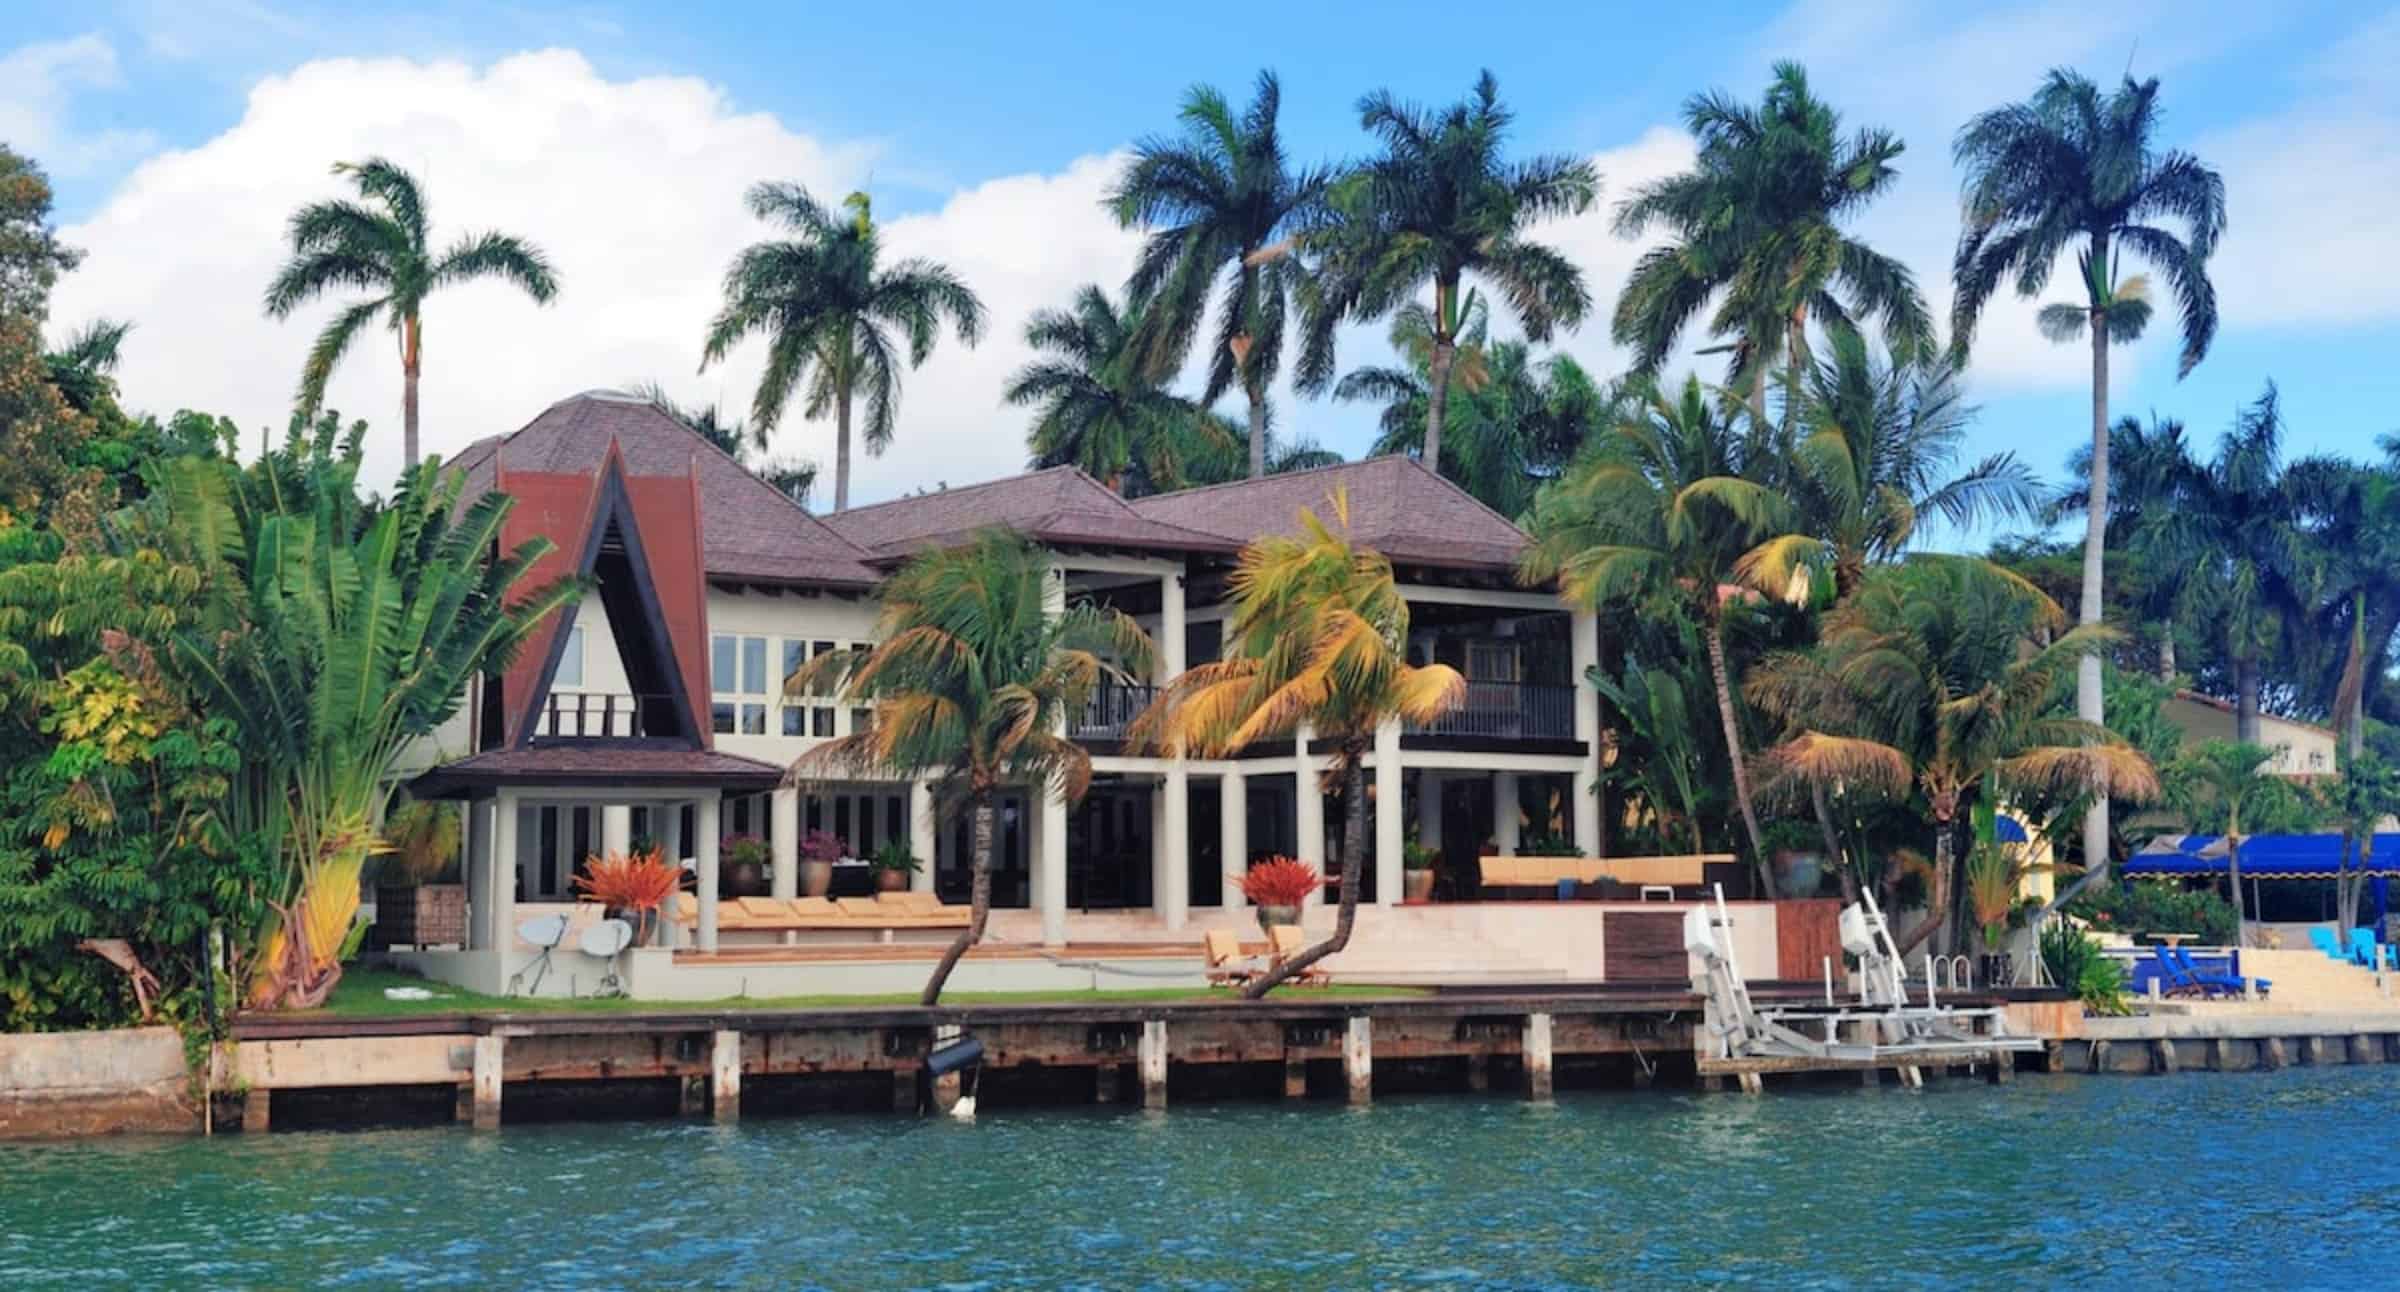 Miamis-Top-Celebrity-Homes-Boat-Tour